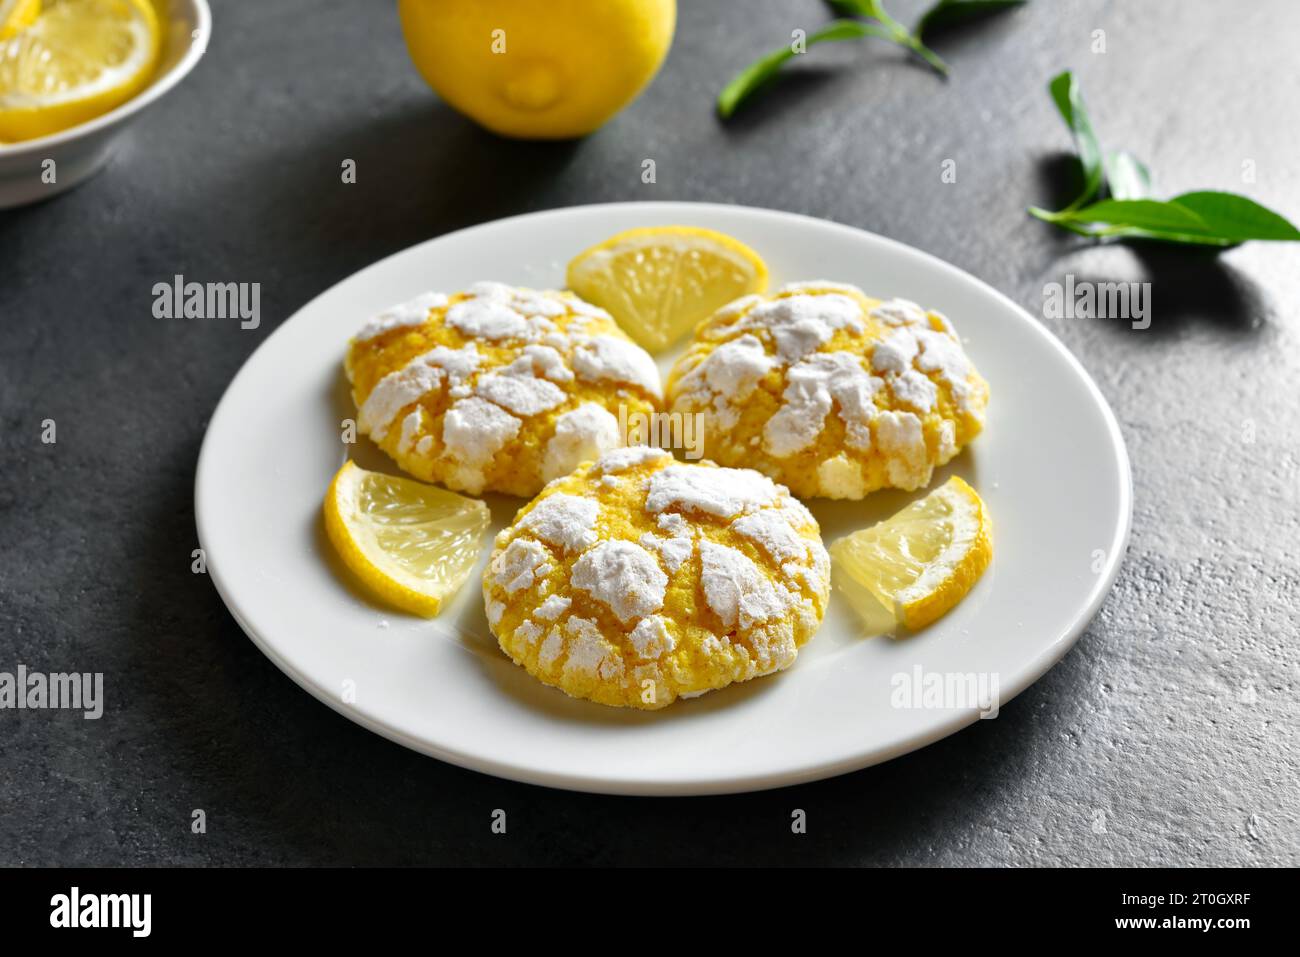 Lemon cookies on plate over dark stone background. Close up view Stock Photo